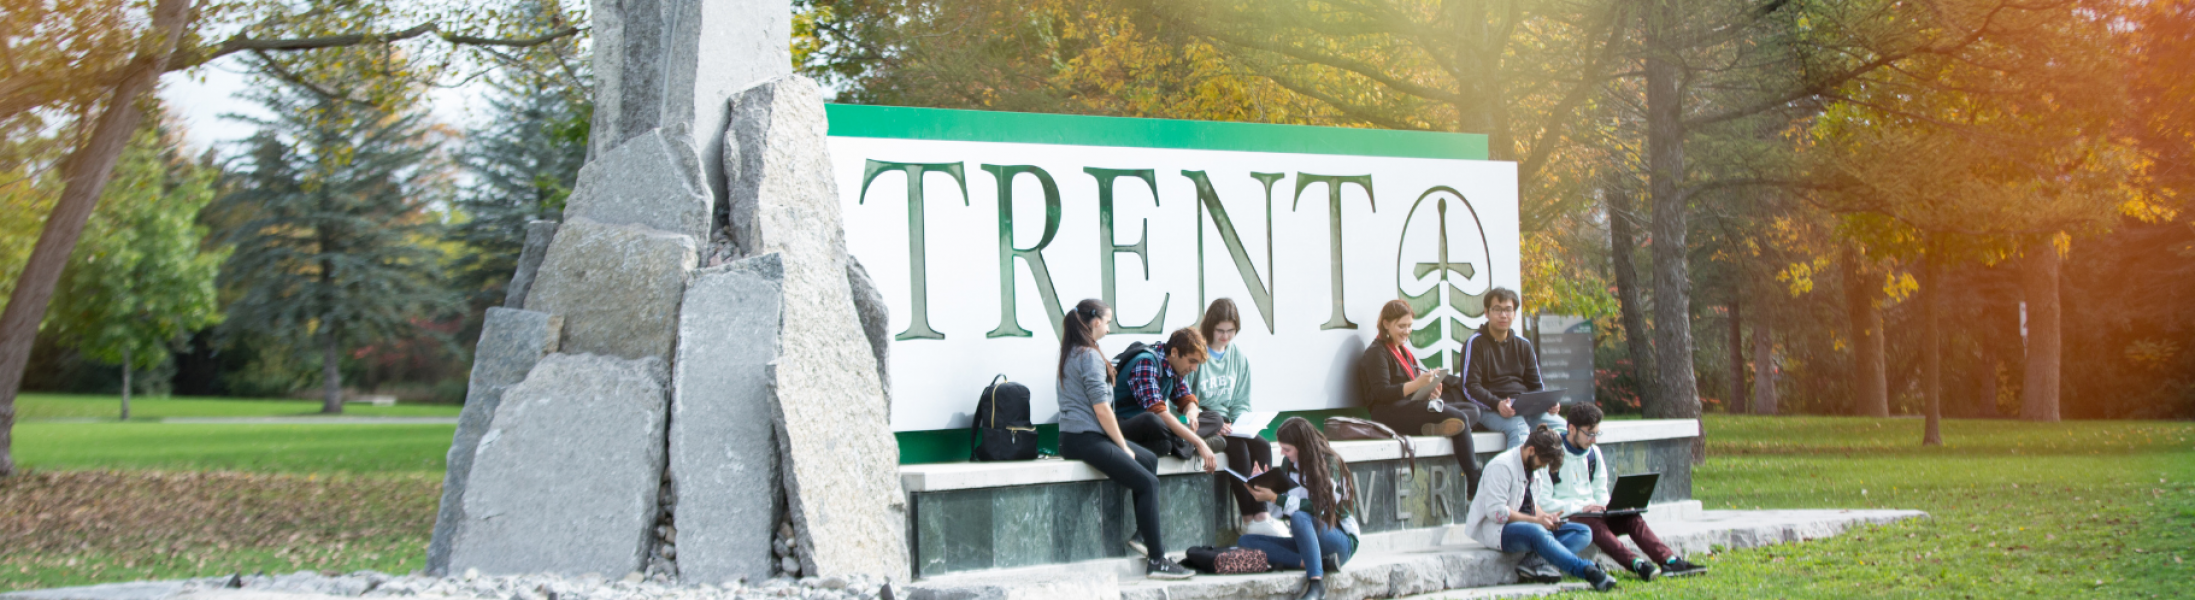 Main Trent University sign with students sitting nearby studying and laughing